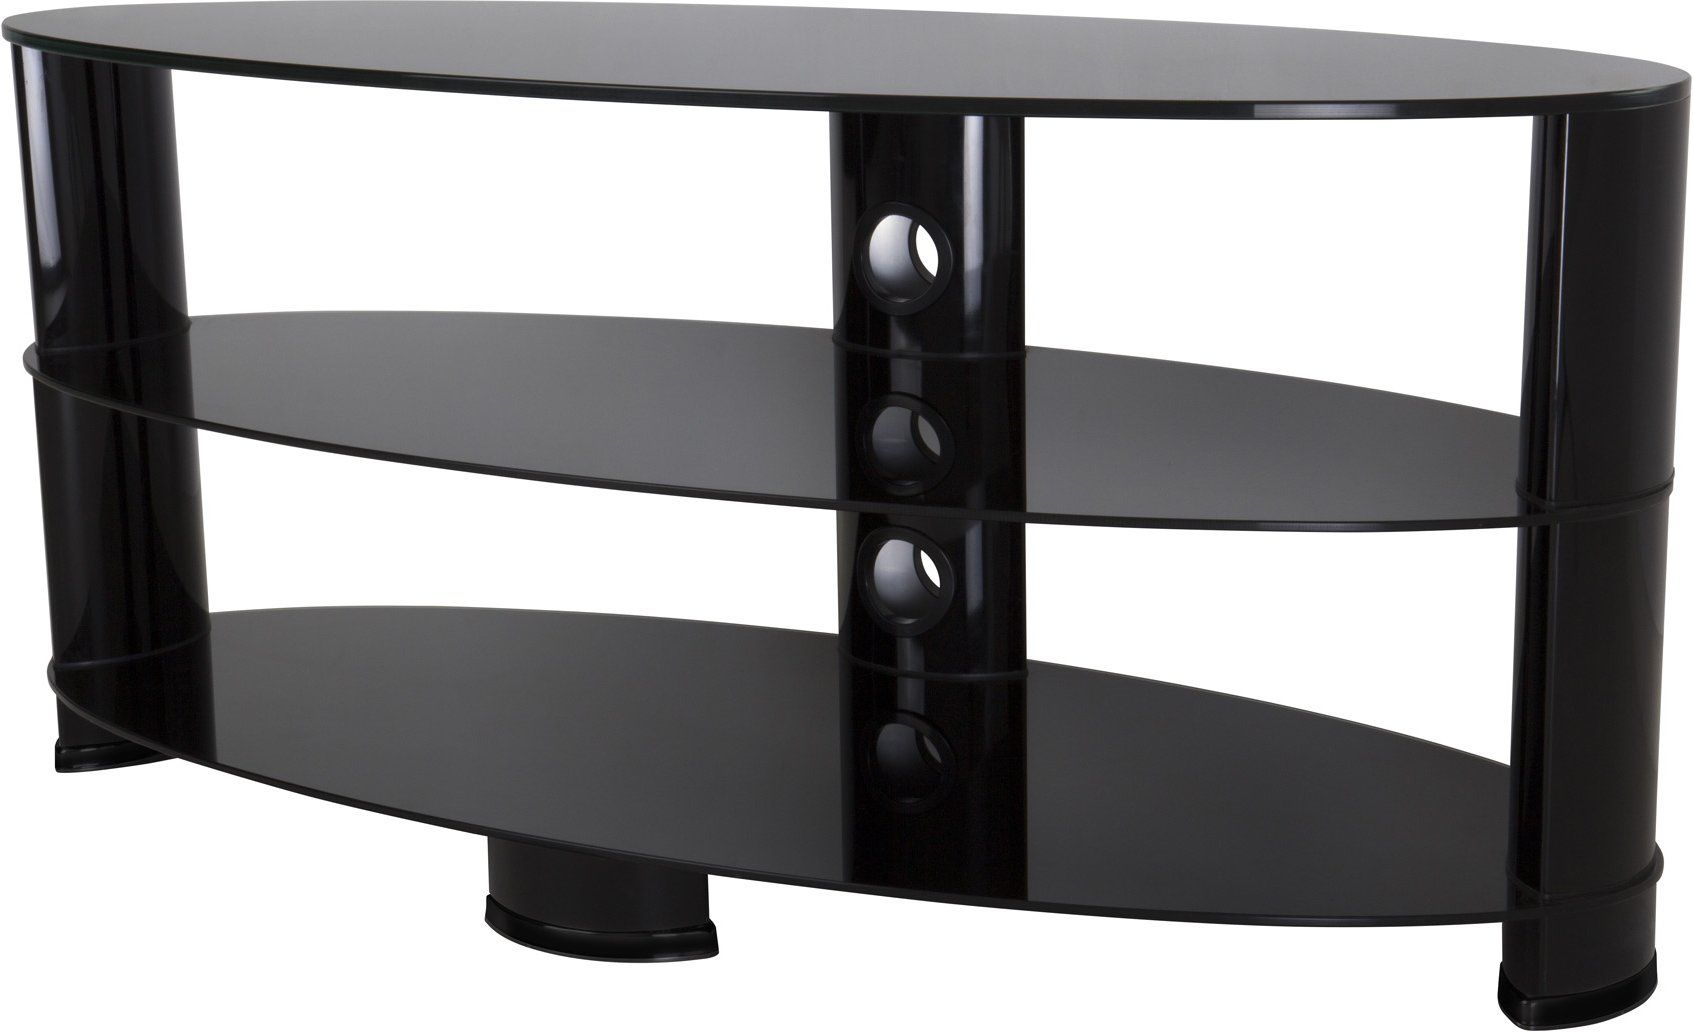 Avf Ovl1200bb Oval Glass Tv Stand For Tvs Up To 55 Inch Within Glass Shelves Tv Stands For Tvs Up To 50" (Photo 6 of 15)